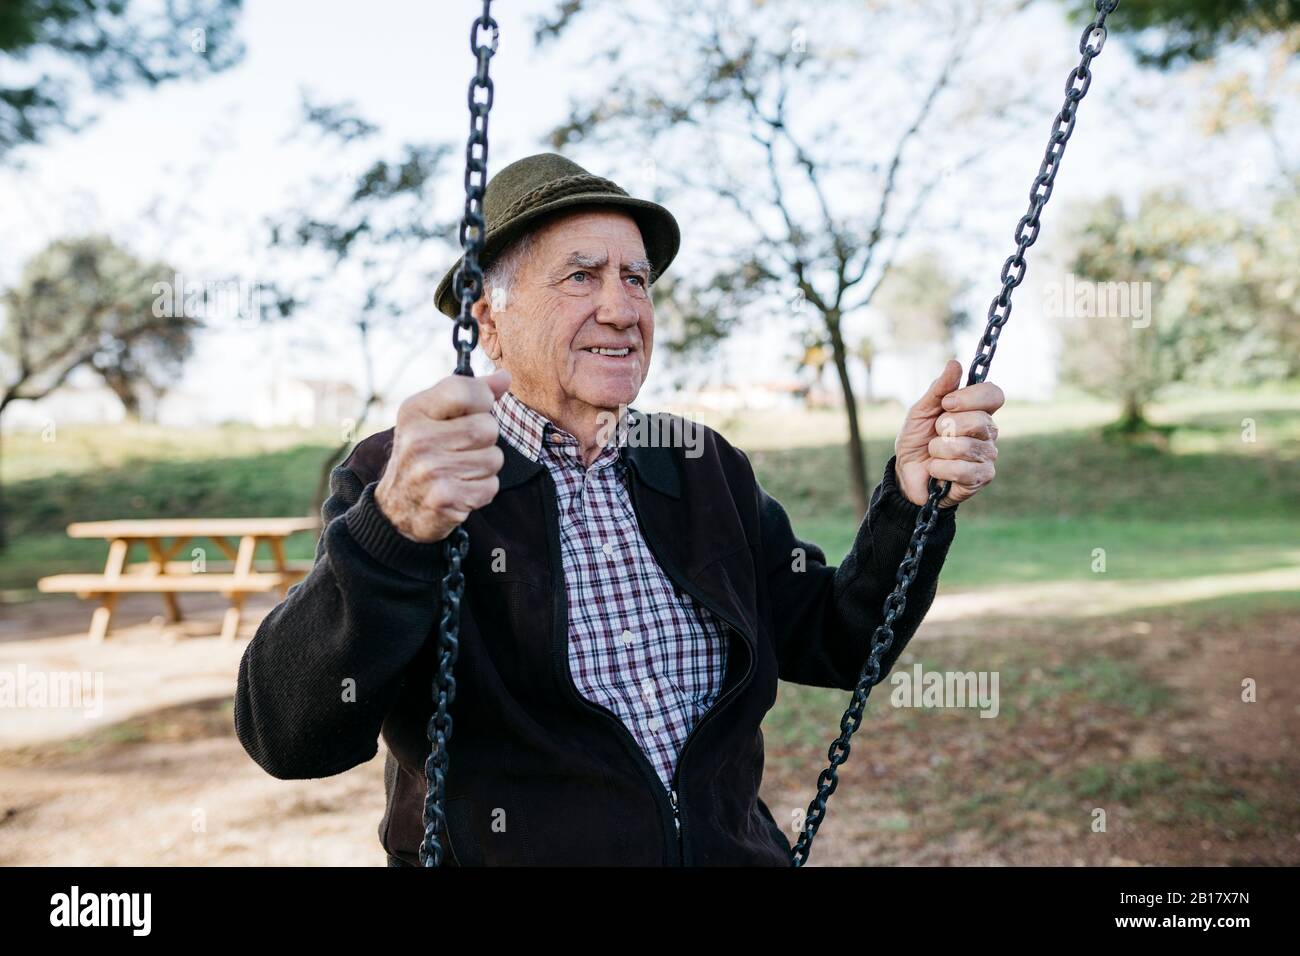 Old man swinging on playground in park Stock Photo